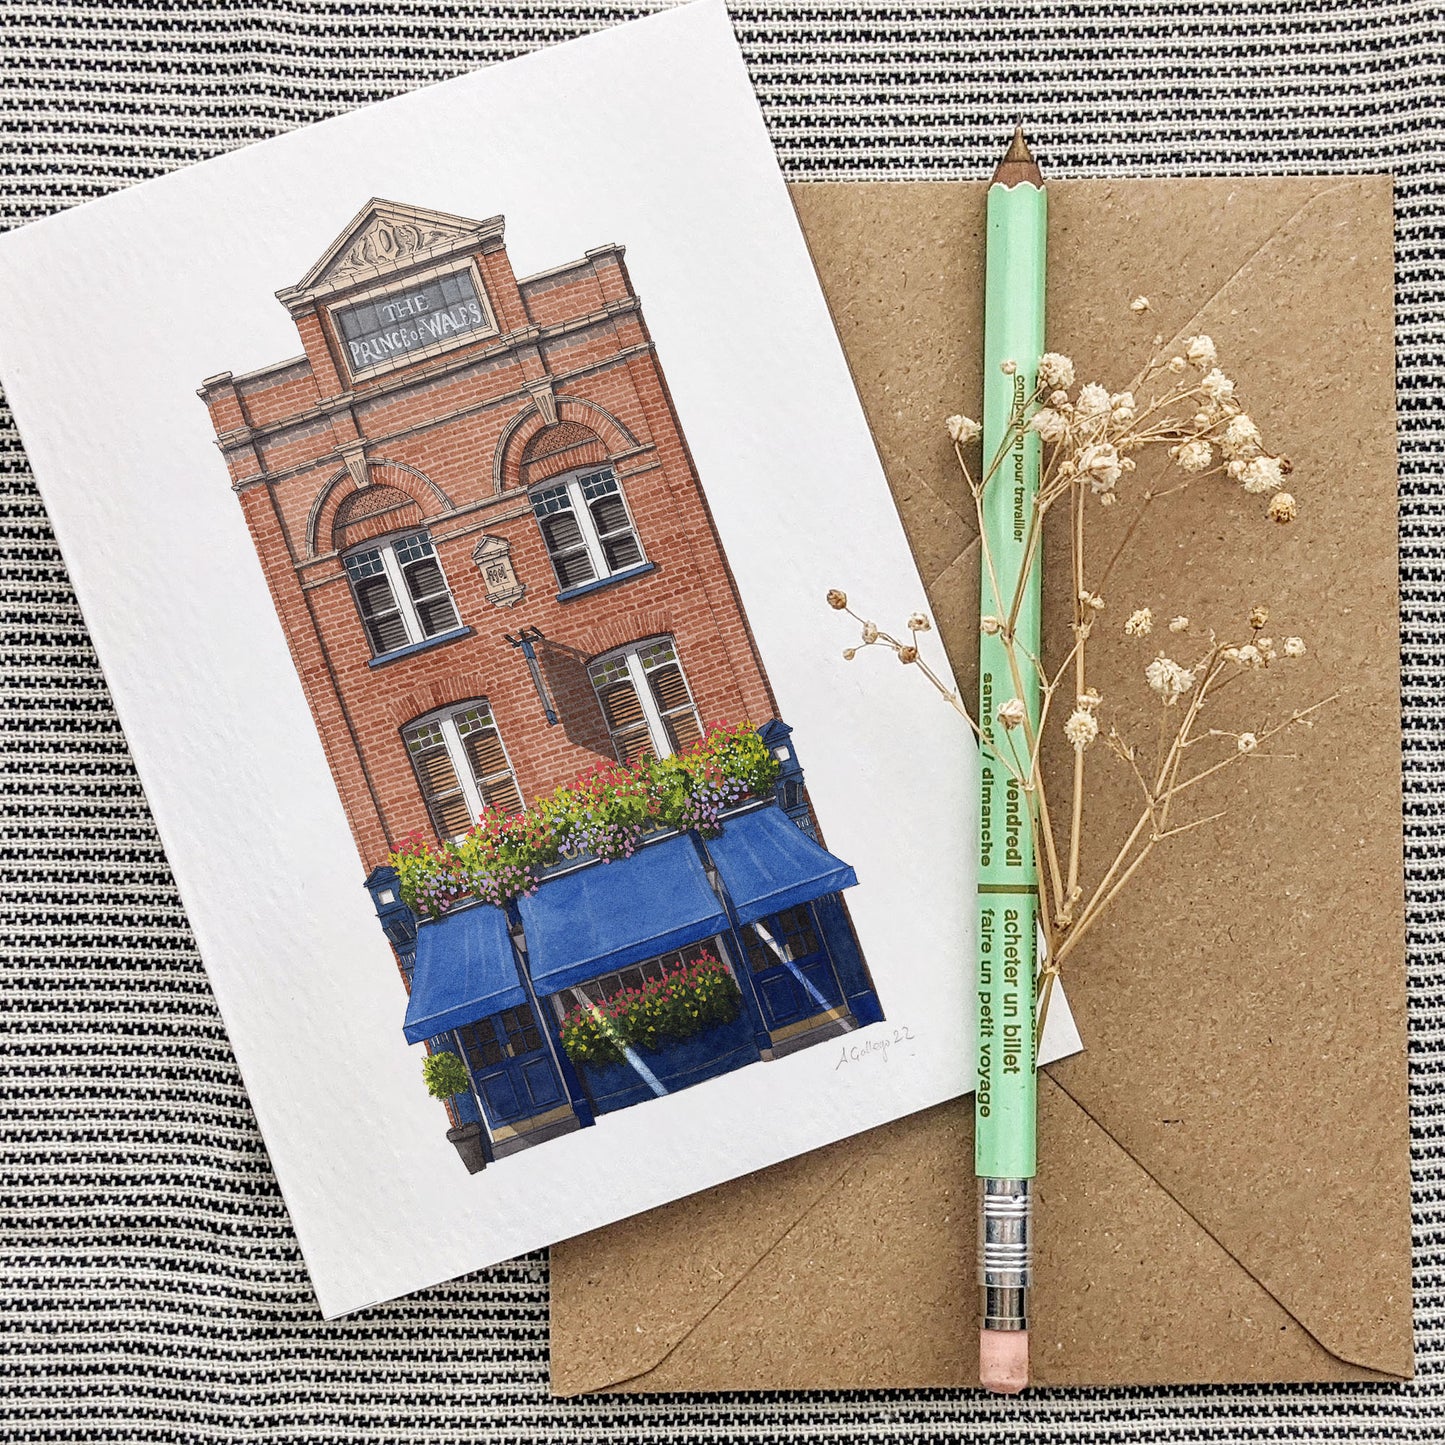 Kennington - The Prince of Wales pub - Greeting card with envelope